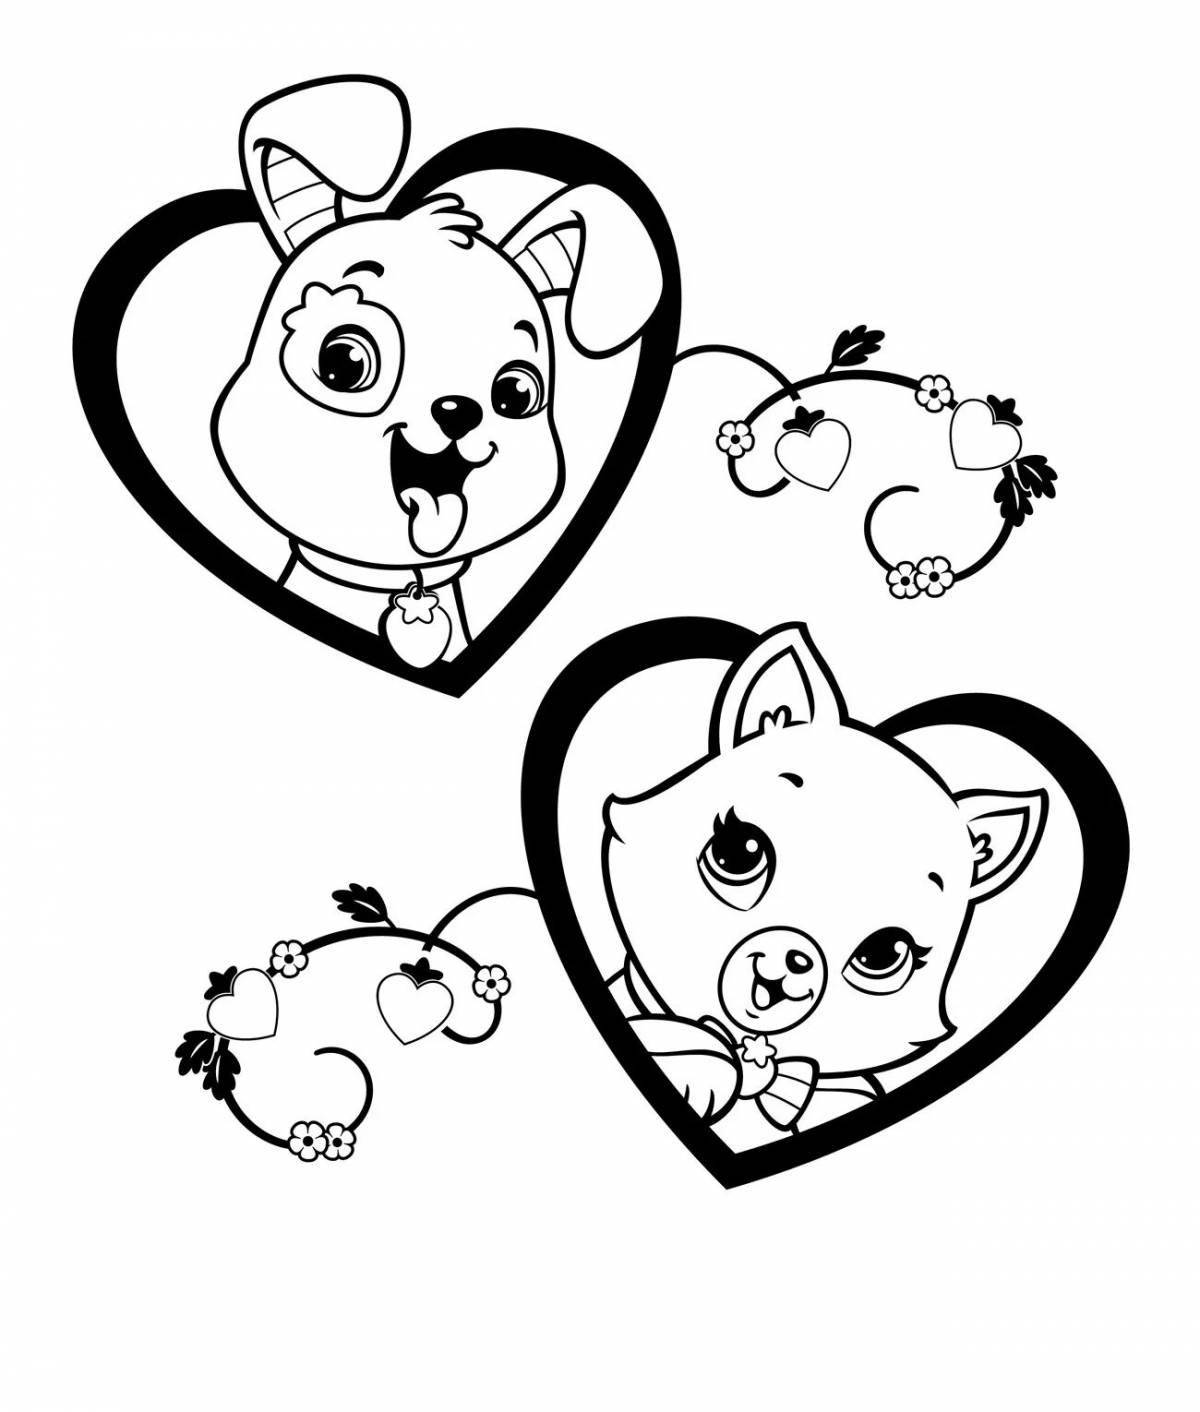 Coloring page funny kitten and dog